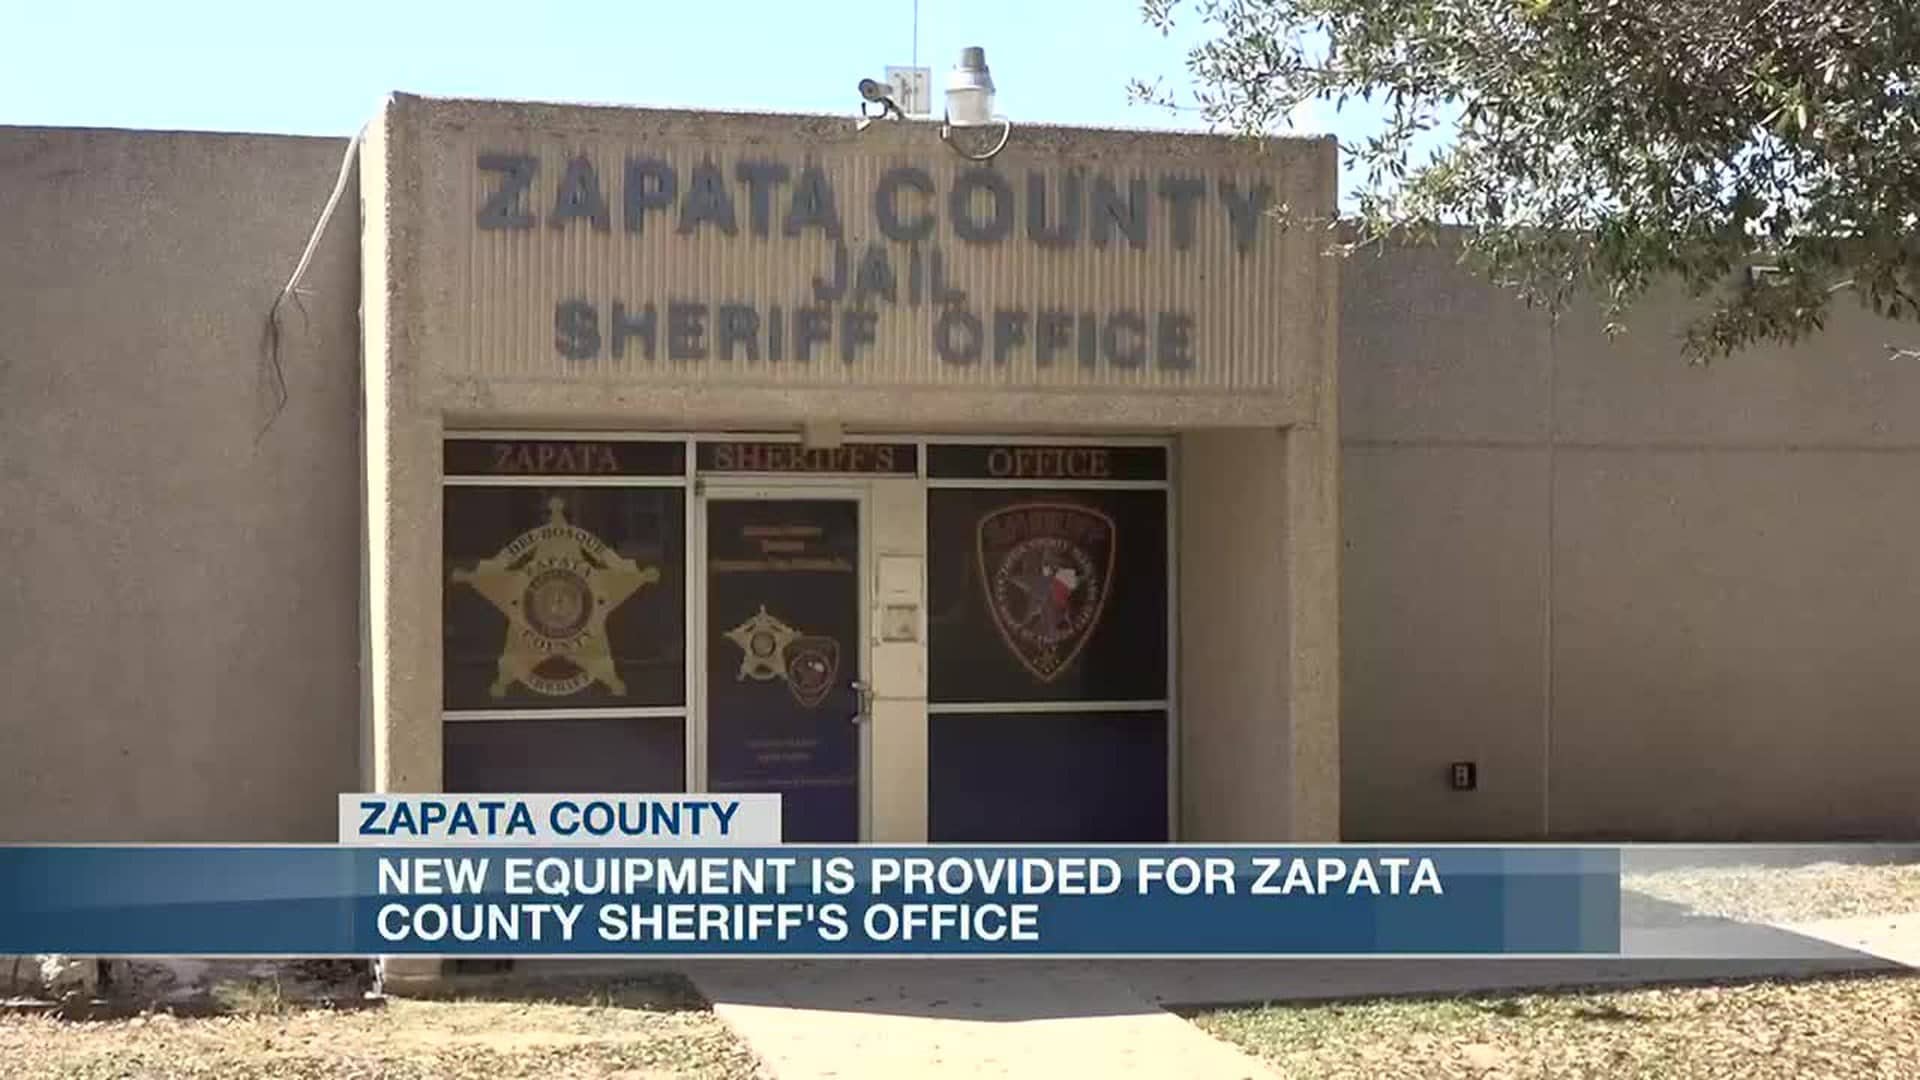 Image of Zapata County Sheriff's Office